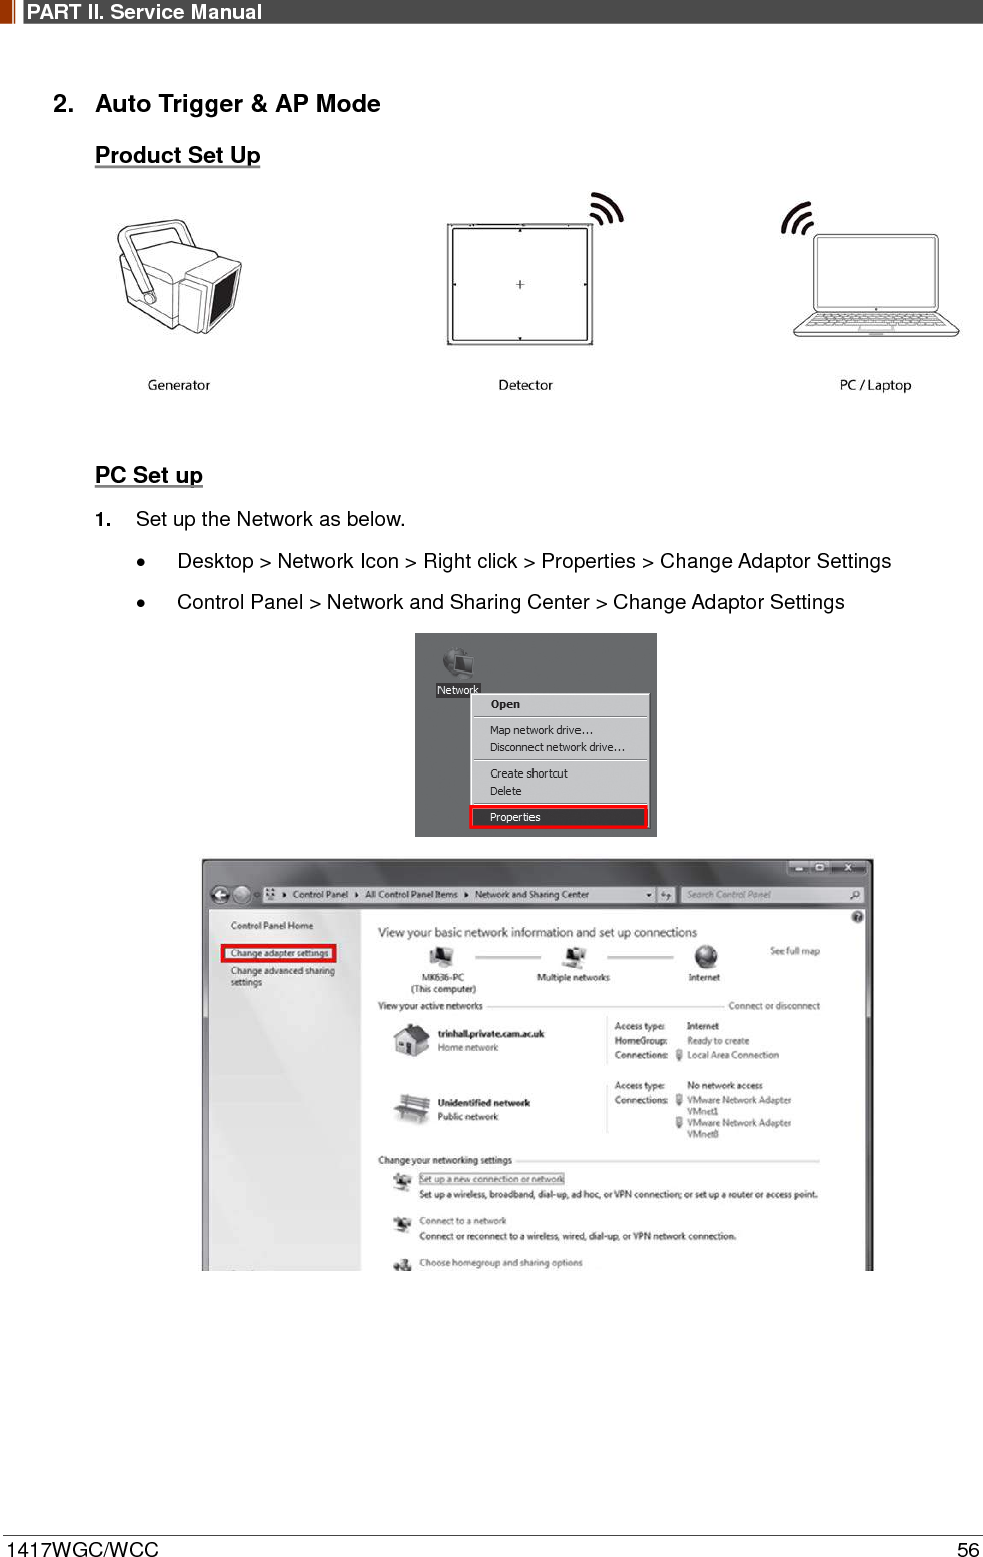 PART II. Service Manual  1417WGC/WCC 56 2. Auto Trigger &amp; AP Mode Product Set Up   PC Set up 1. Set up the Network as below. • Desktop &gt; Network Icon &gt; Right click &gt; Properties &gt; Change Adaptor Settings • Control Panel &gt; Network and Sharing Center &gt; Change Adaptor Settings      